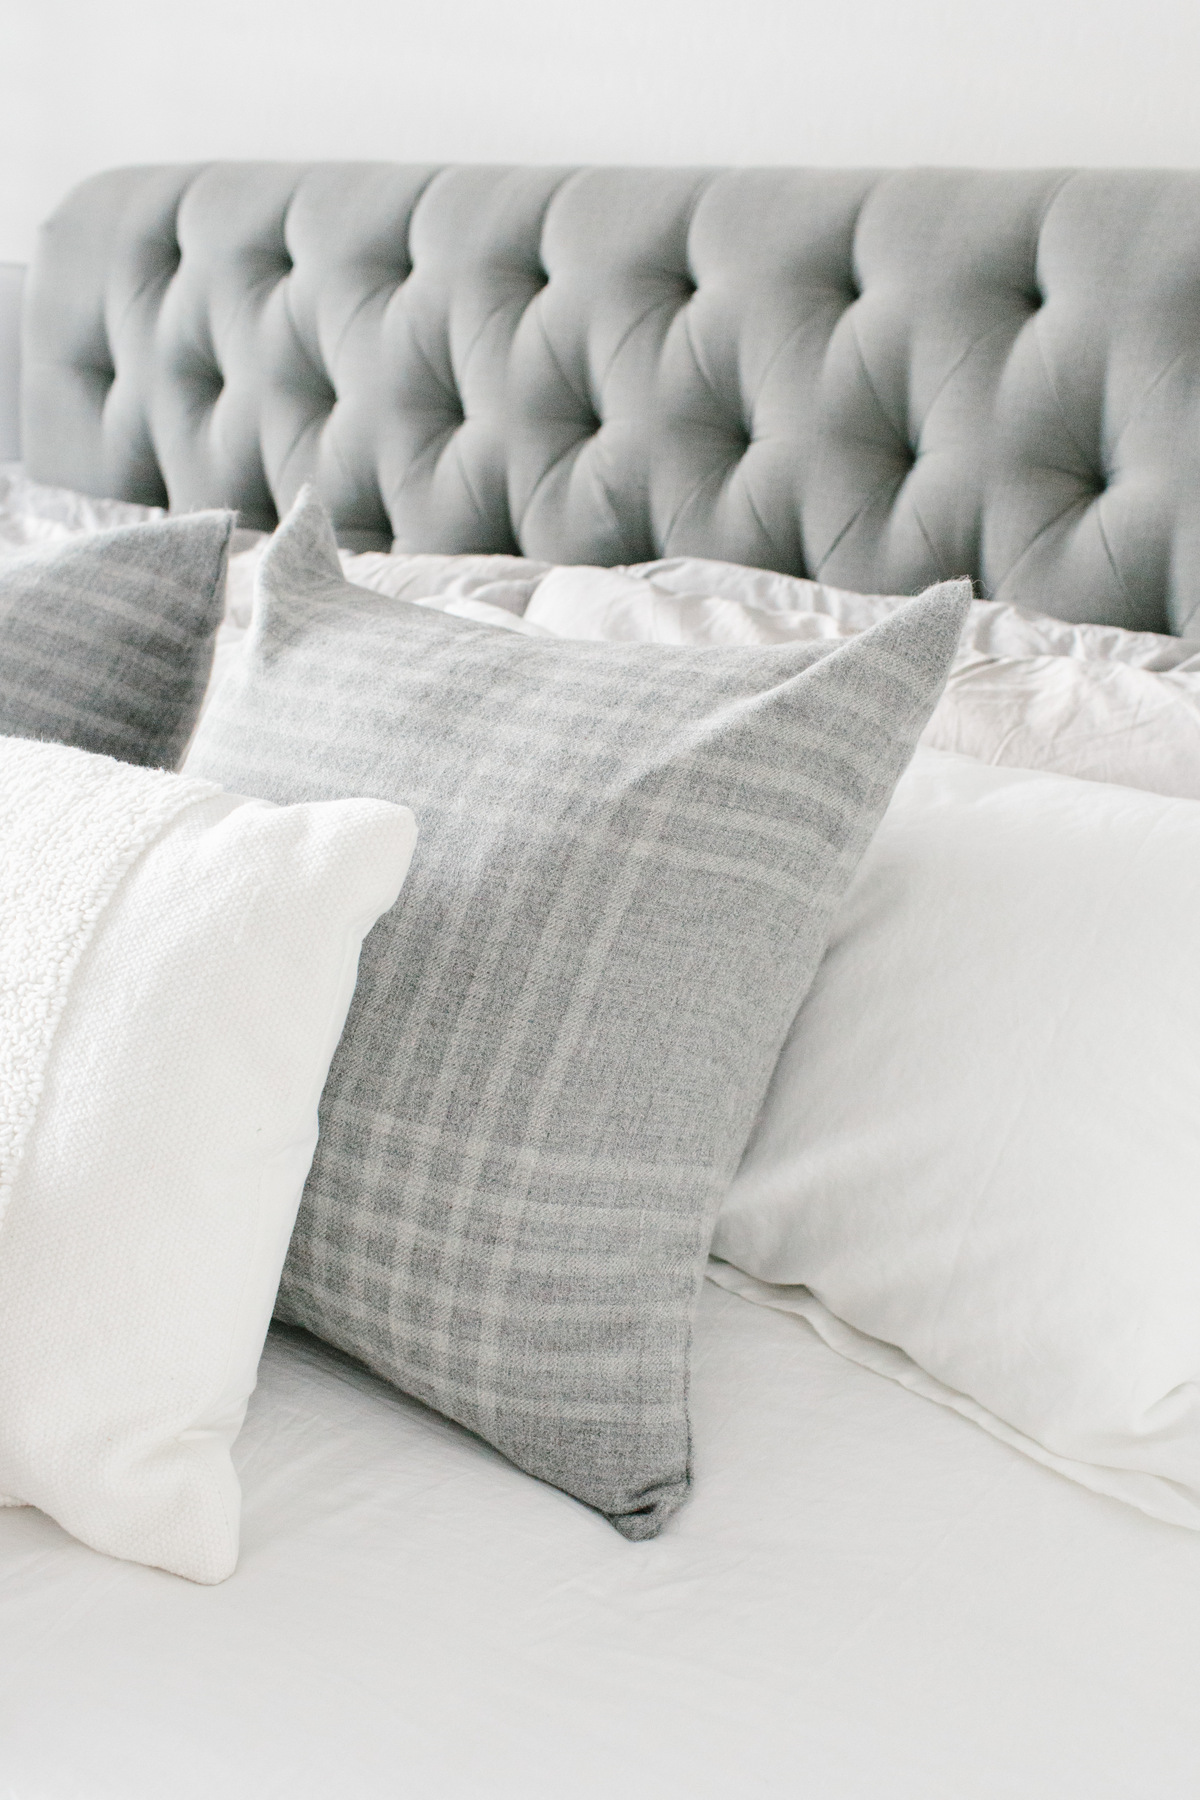 Serena & Lilly Plaid Pillows